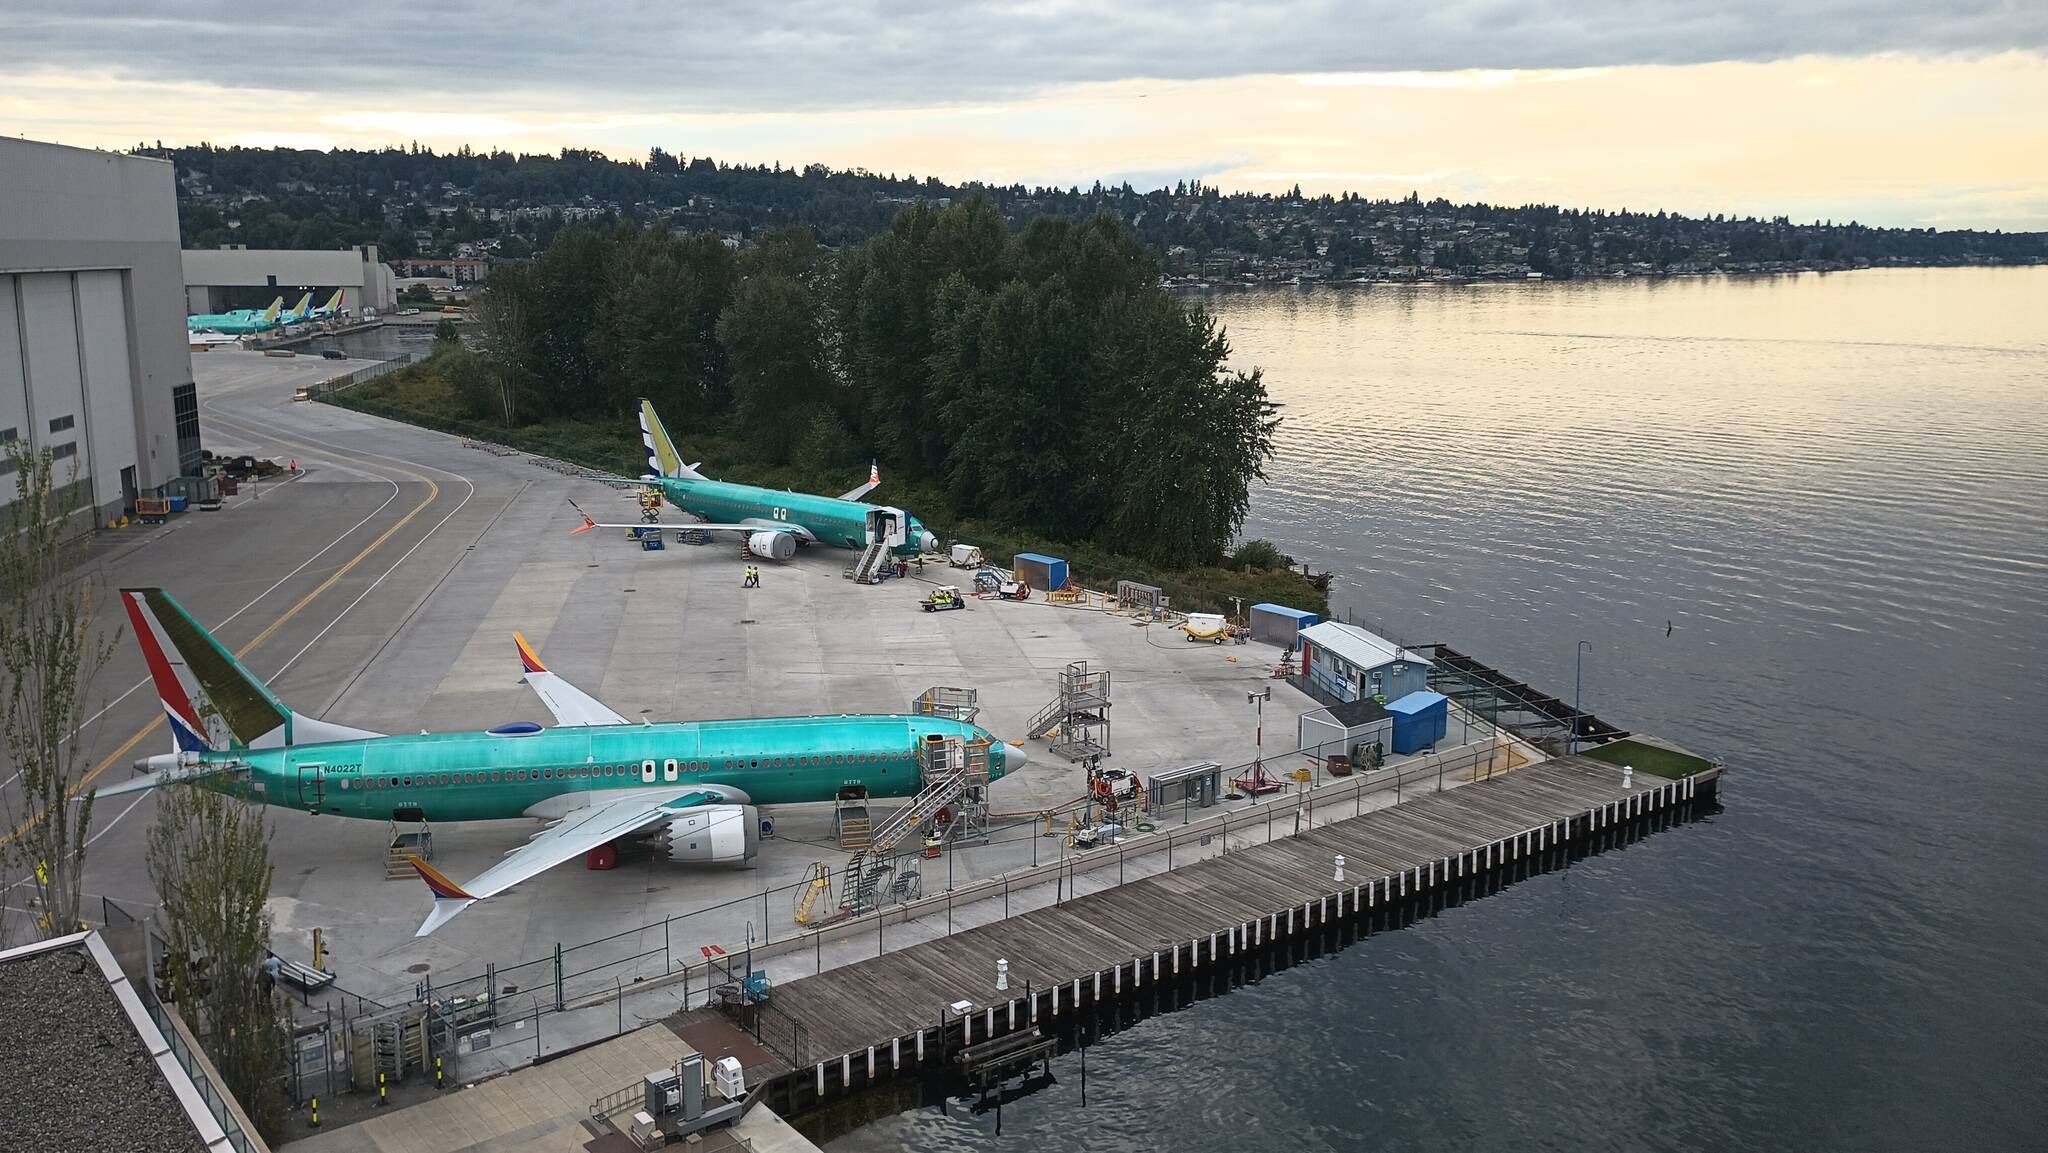 The view of Boeing and Lake Washington from the Hyatt Regency in Renton. Photo by Bailey Jo Josie/Sound Publishing.